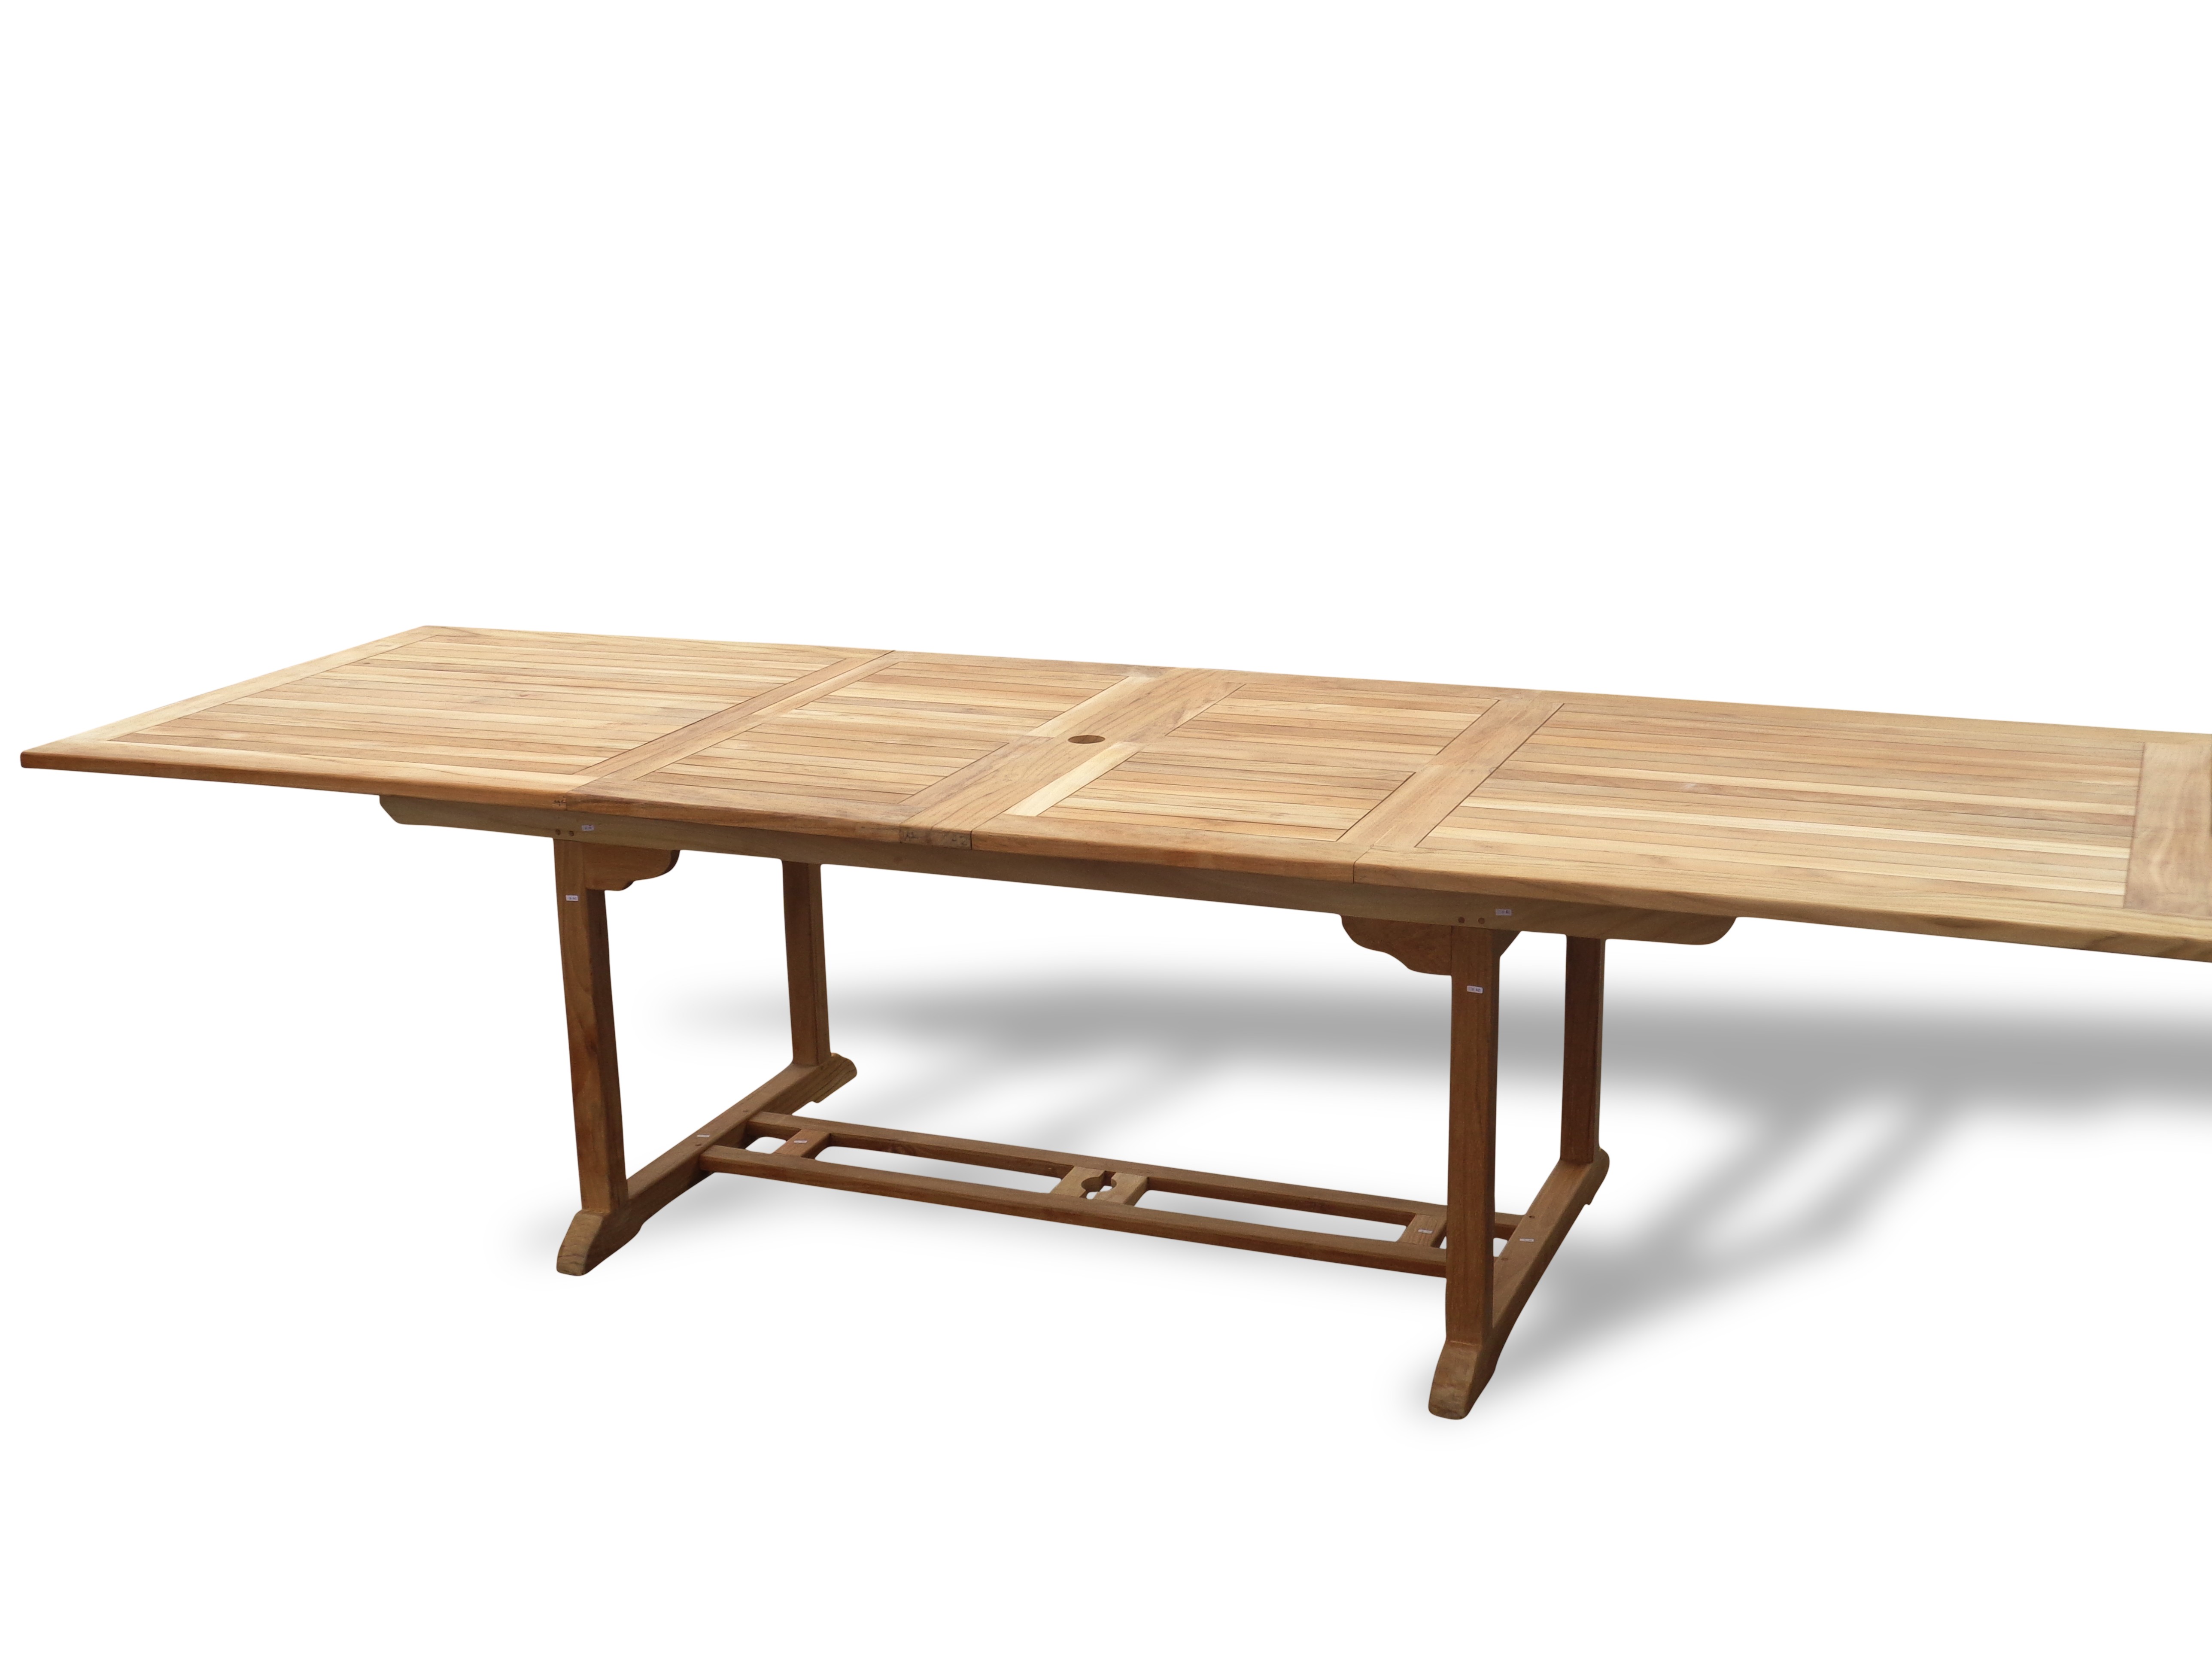 Buckingham 138" x 39" Grade A Teak Rectangular Double Leaf Extension Table...(11.5 Foot Long Table) Seats 16 Adults....makes 3 Different Size Tables